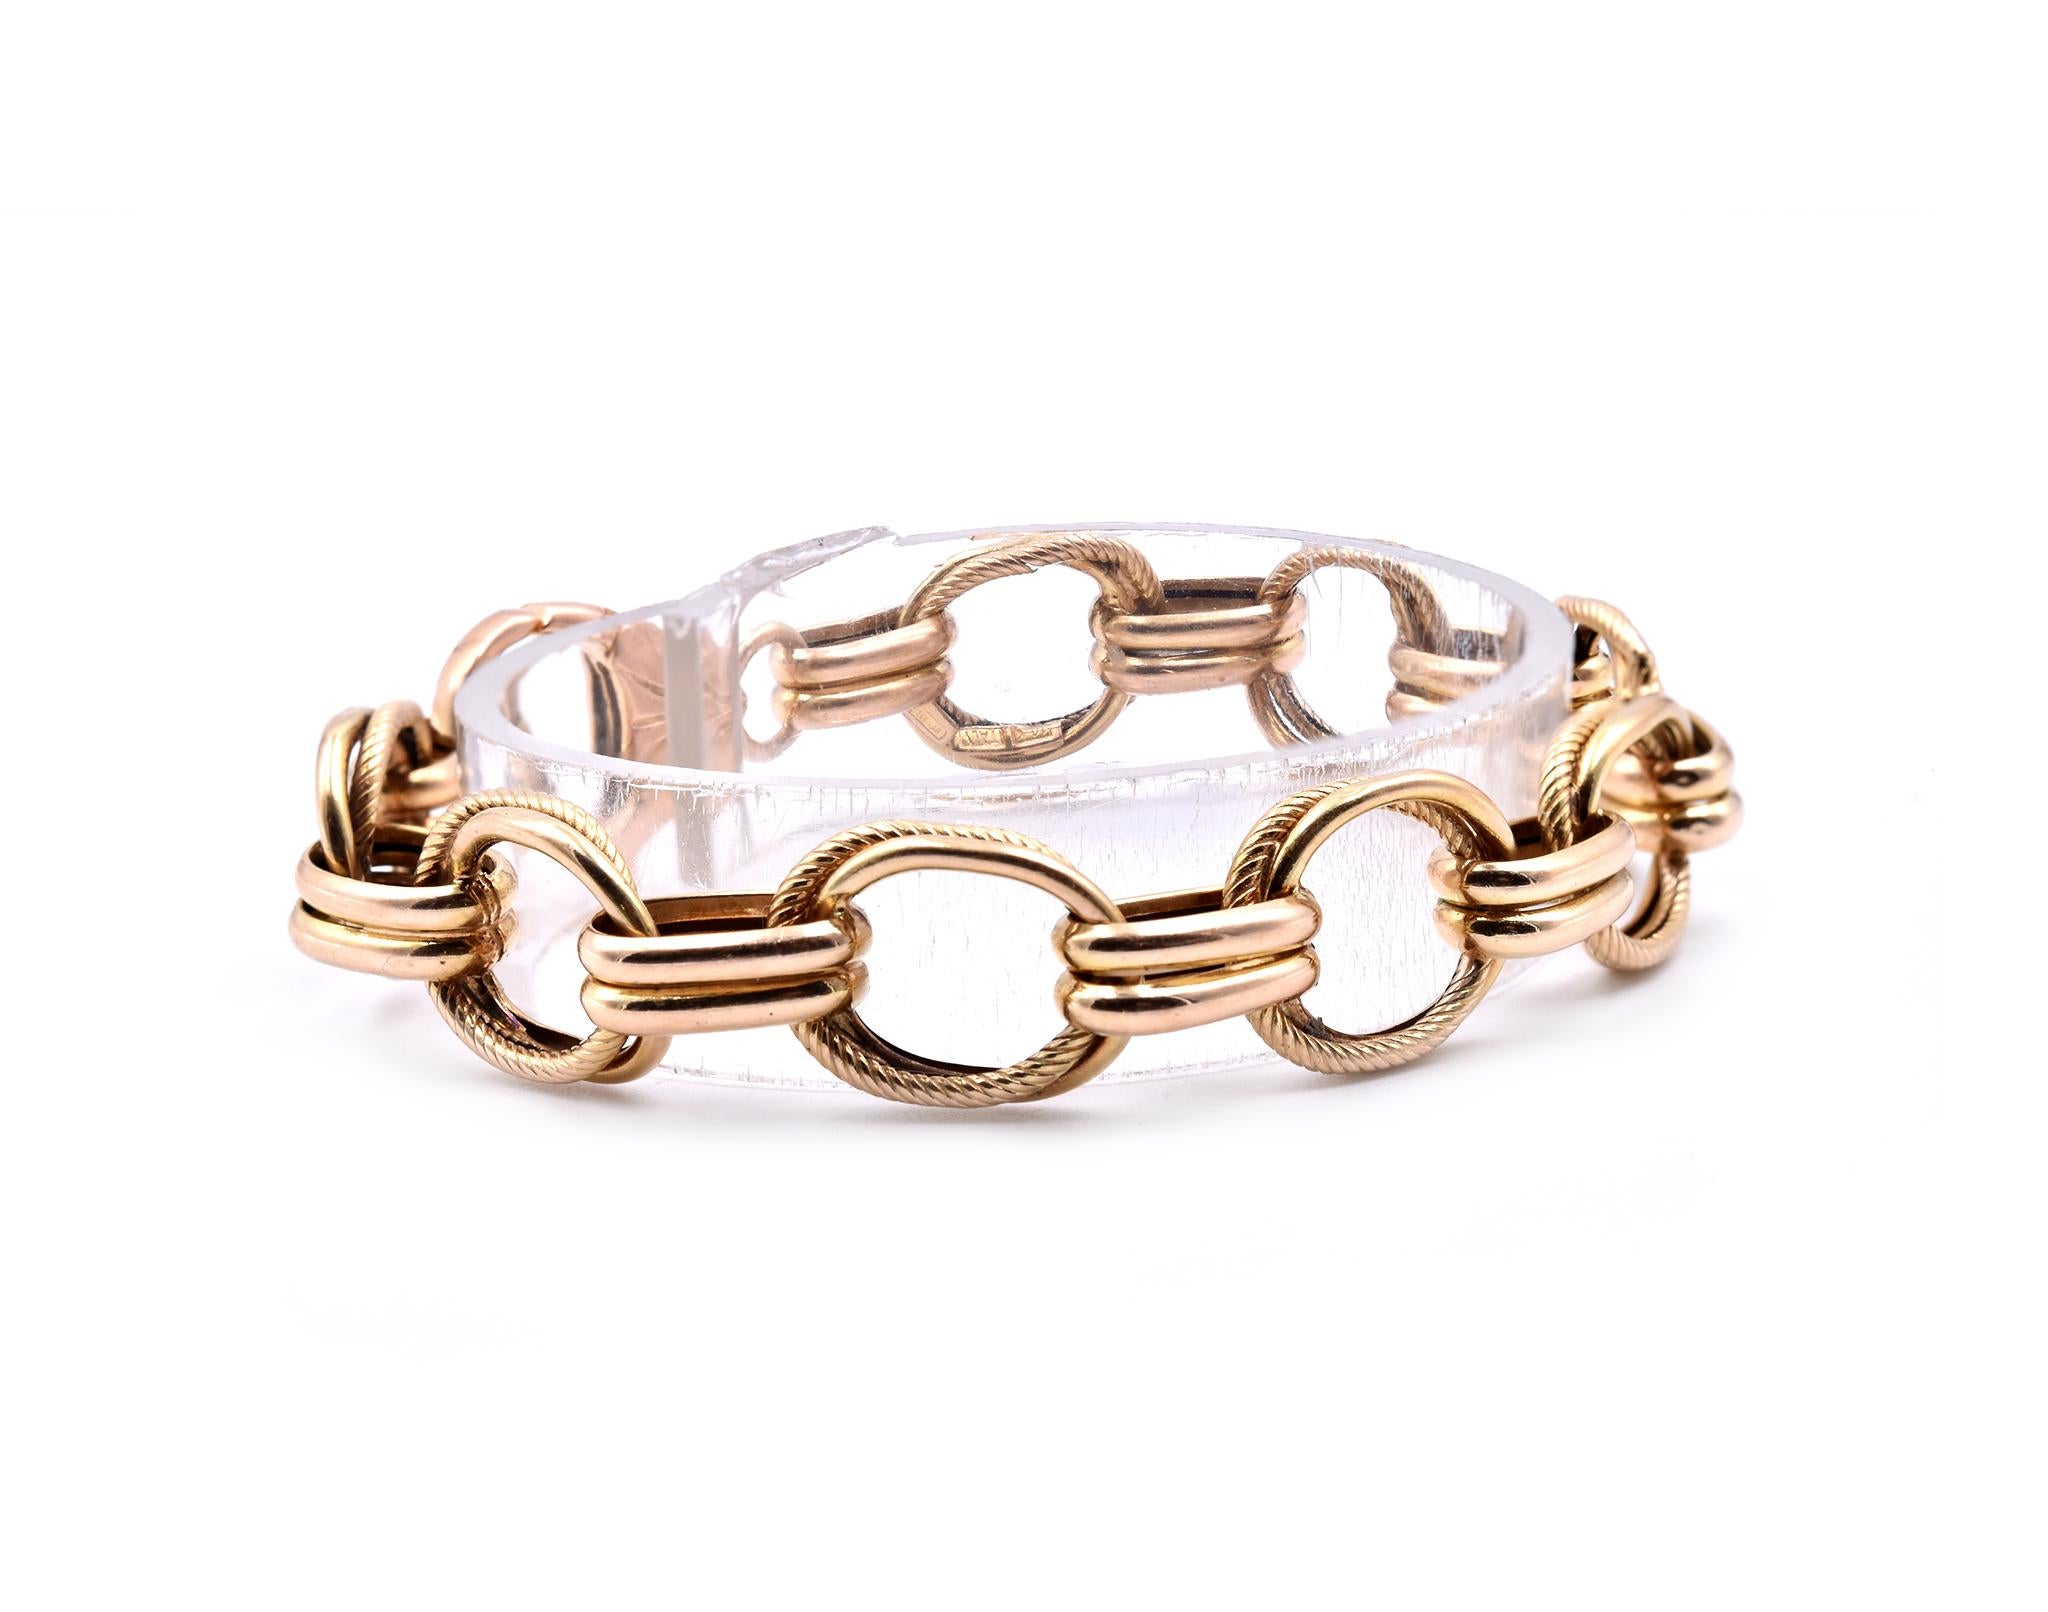 Designer: custom 
Material: 14k yellow gold
Dimensions: the bracelet measures 7.5- inches in length
Weight:  12.62 grams
